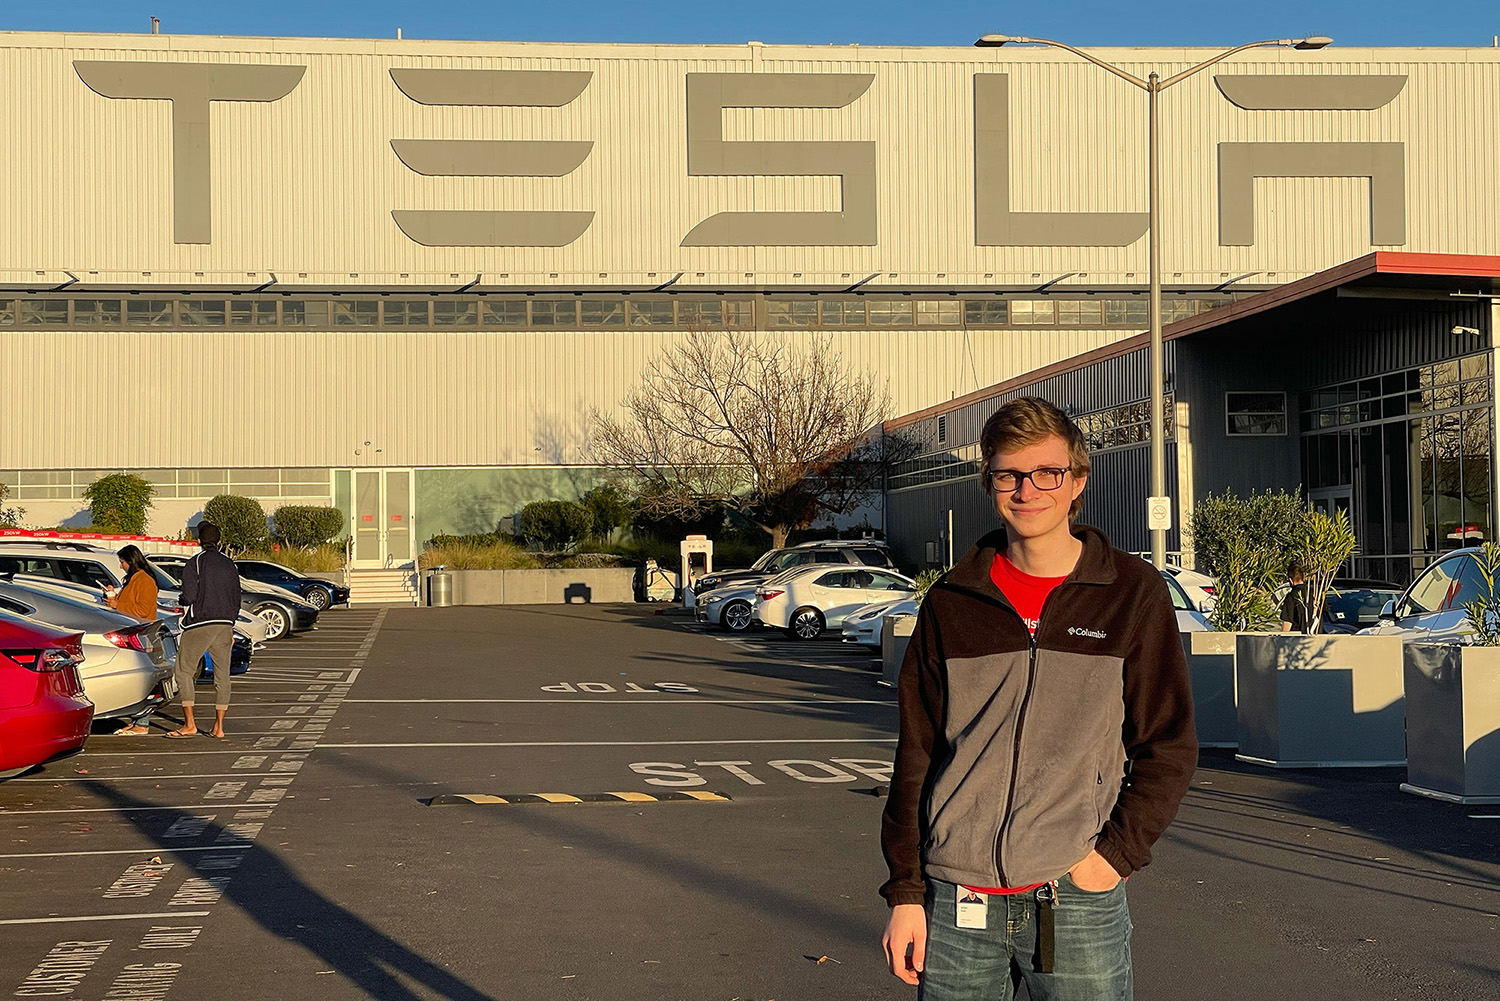 Jackson Glozer stands in front of a Tesla sign while on co-op there.